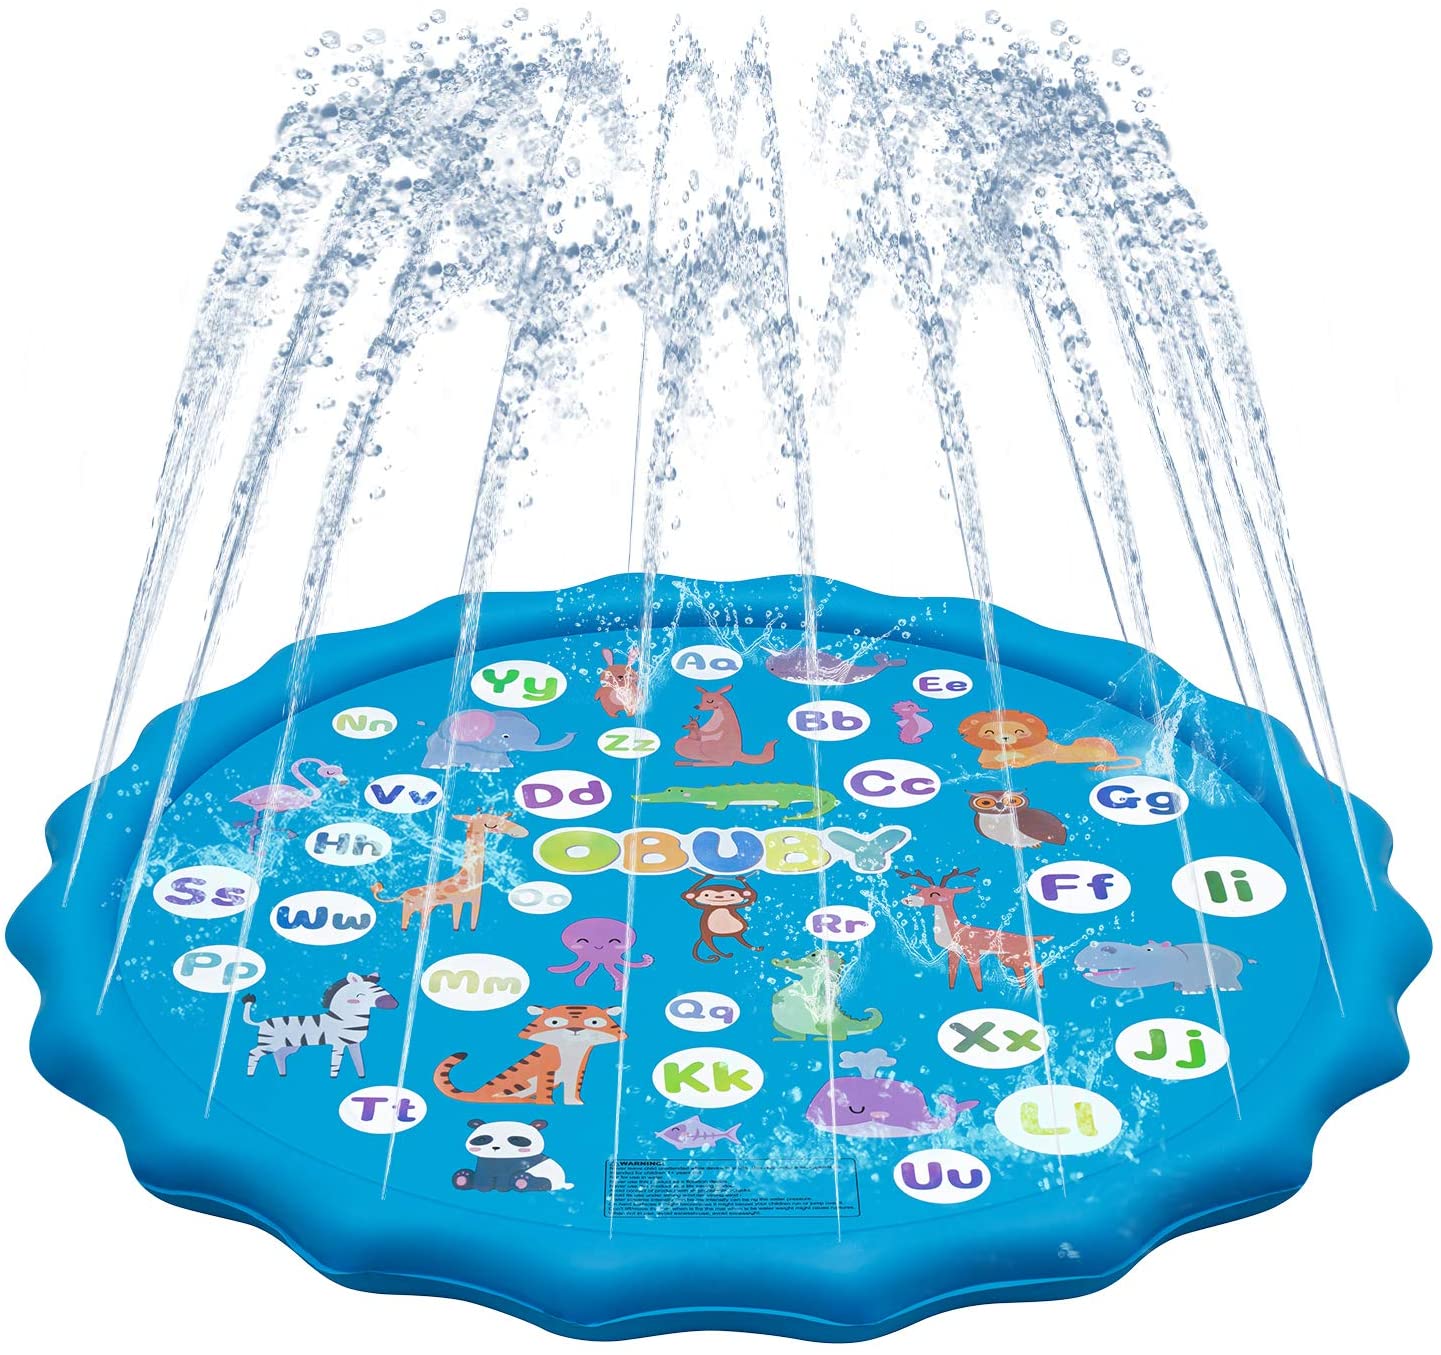 Fun backyard water toys for kids: This alphabet splash mat is a fun way to learn your letters and cool off outside.